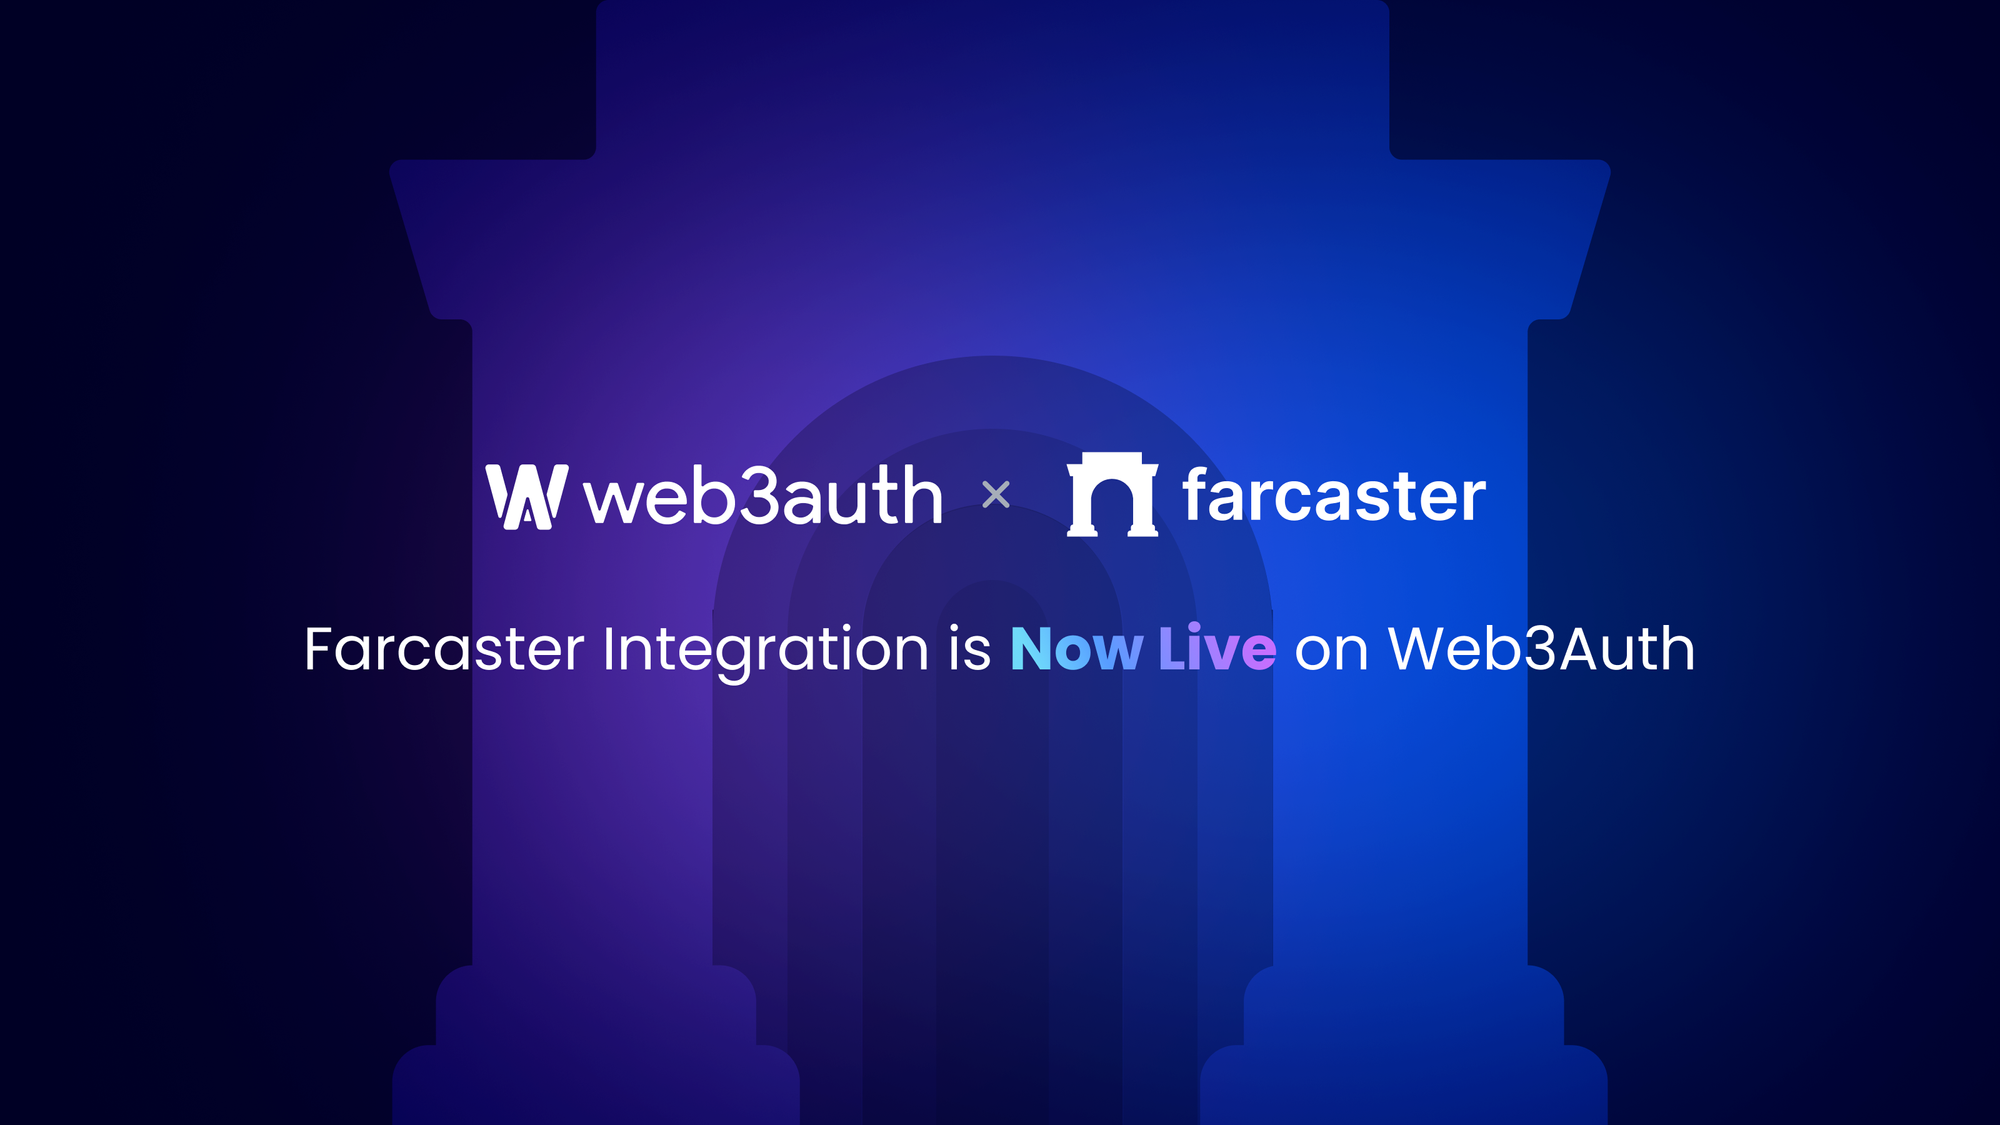 Farcaster Integration is Now Live on Web3Auth